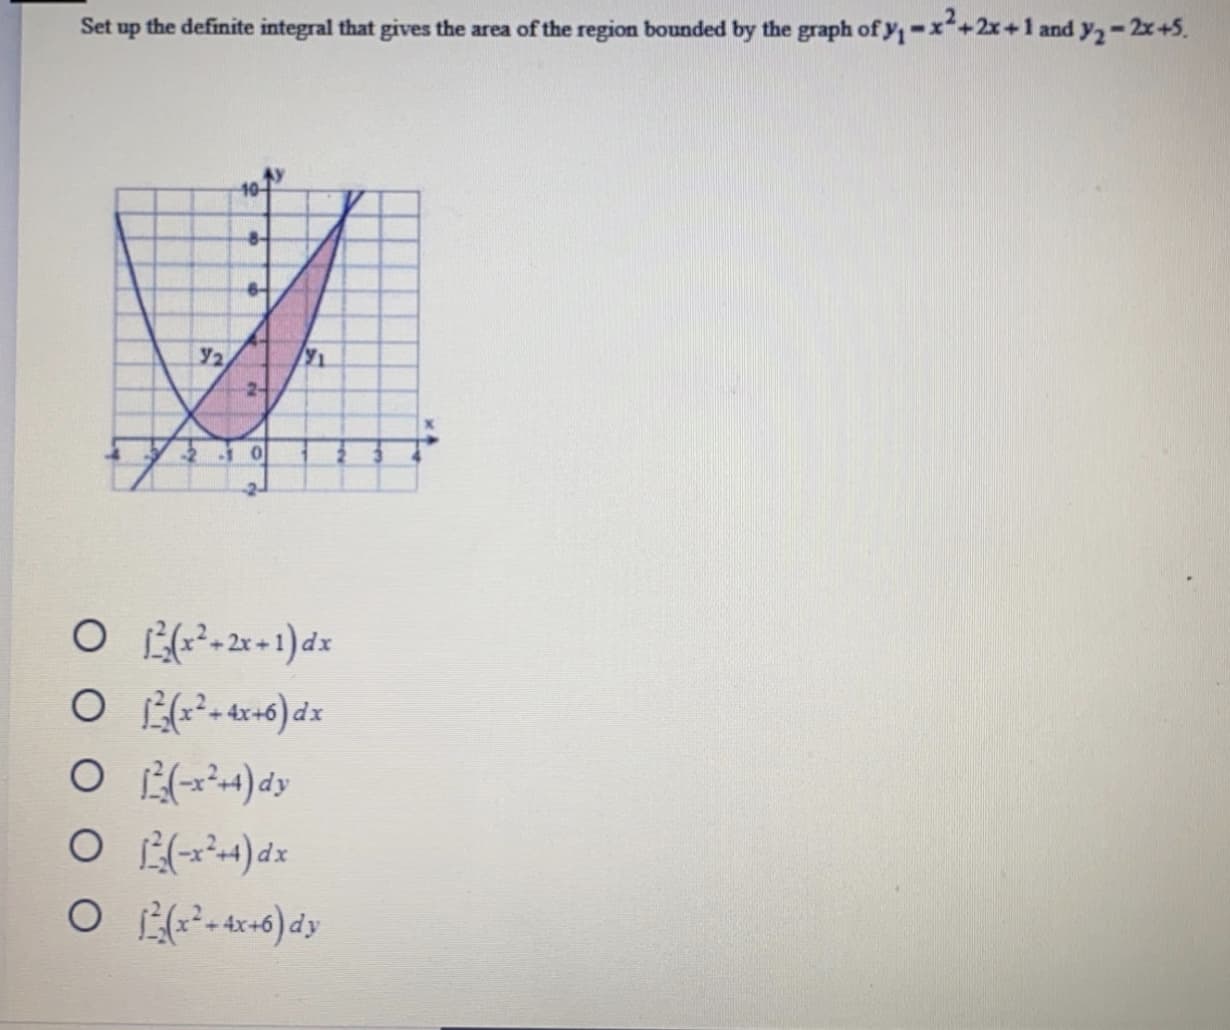 Set
up
the definite integral that gives the area of the region bounded by the graph of y,-x+2x+1 and y2-2x+5.
10-
8-
6-
2-
